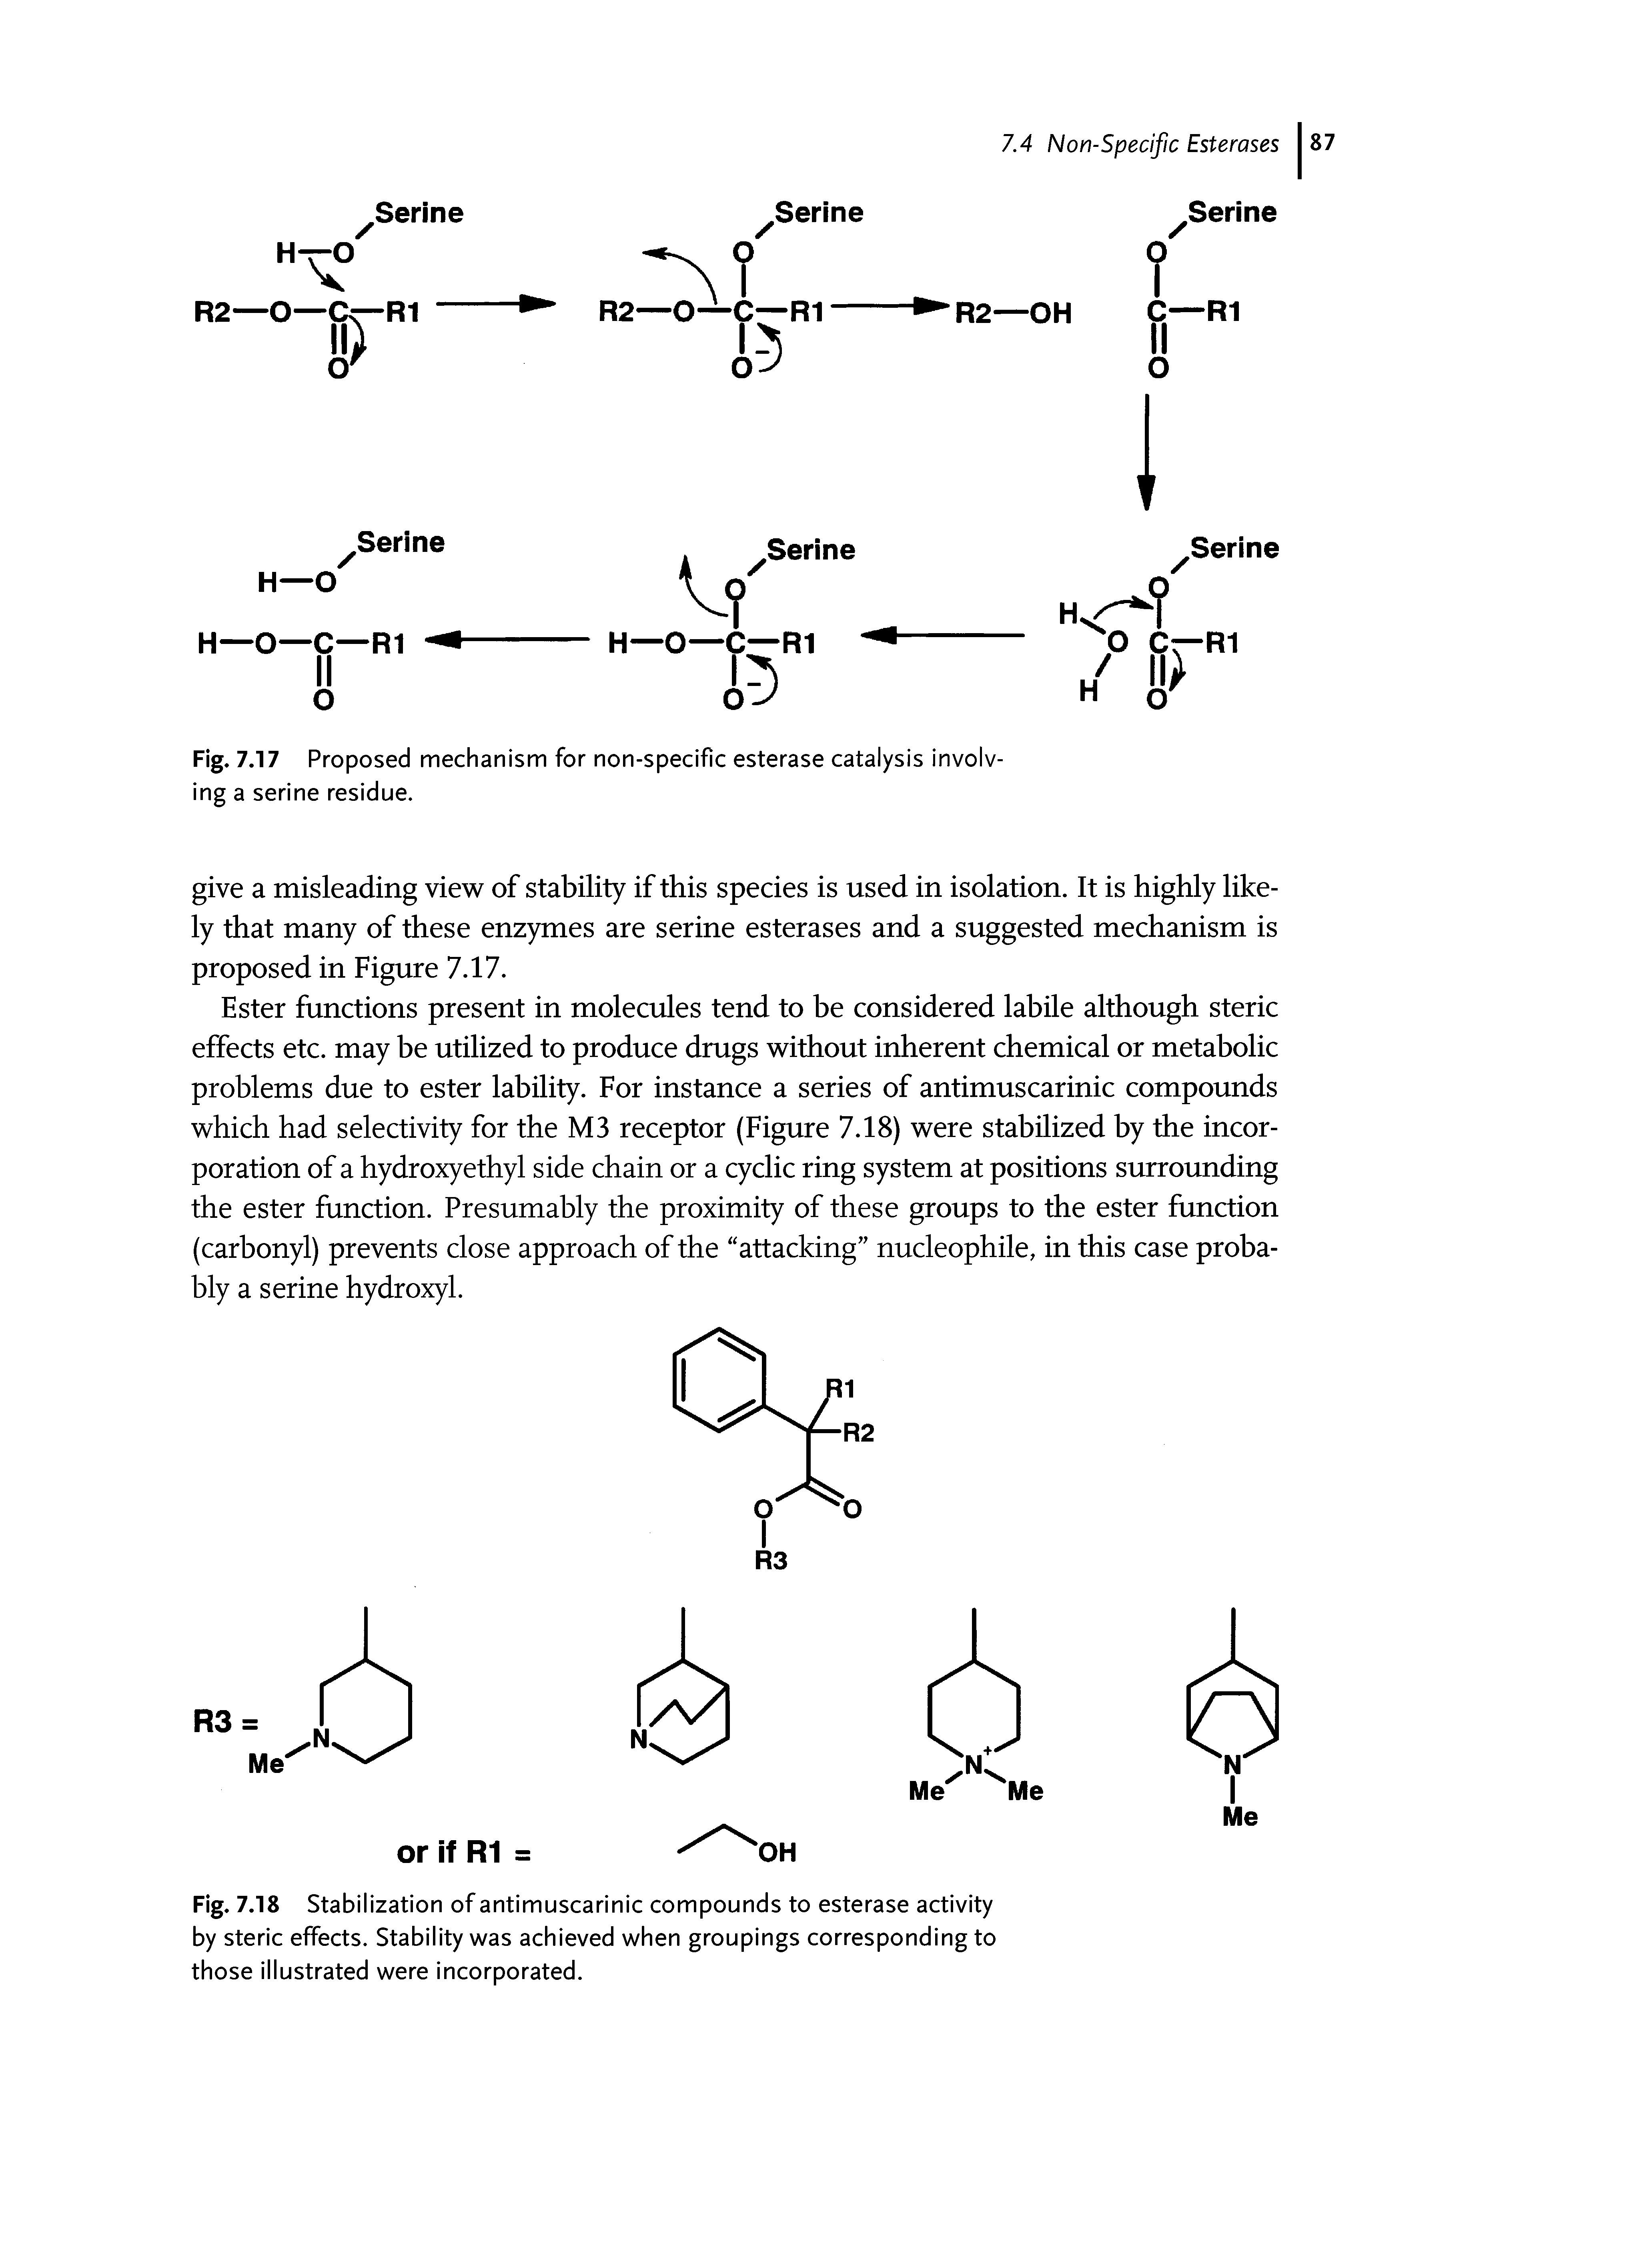 Fig. 7.17 Proposed mechanism for non-specific esterase catalysis involving a serine residue.